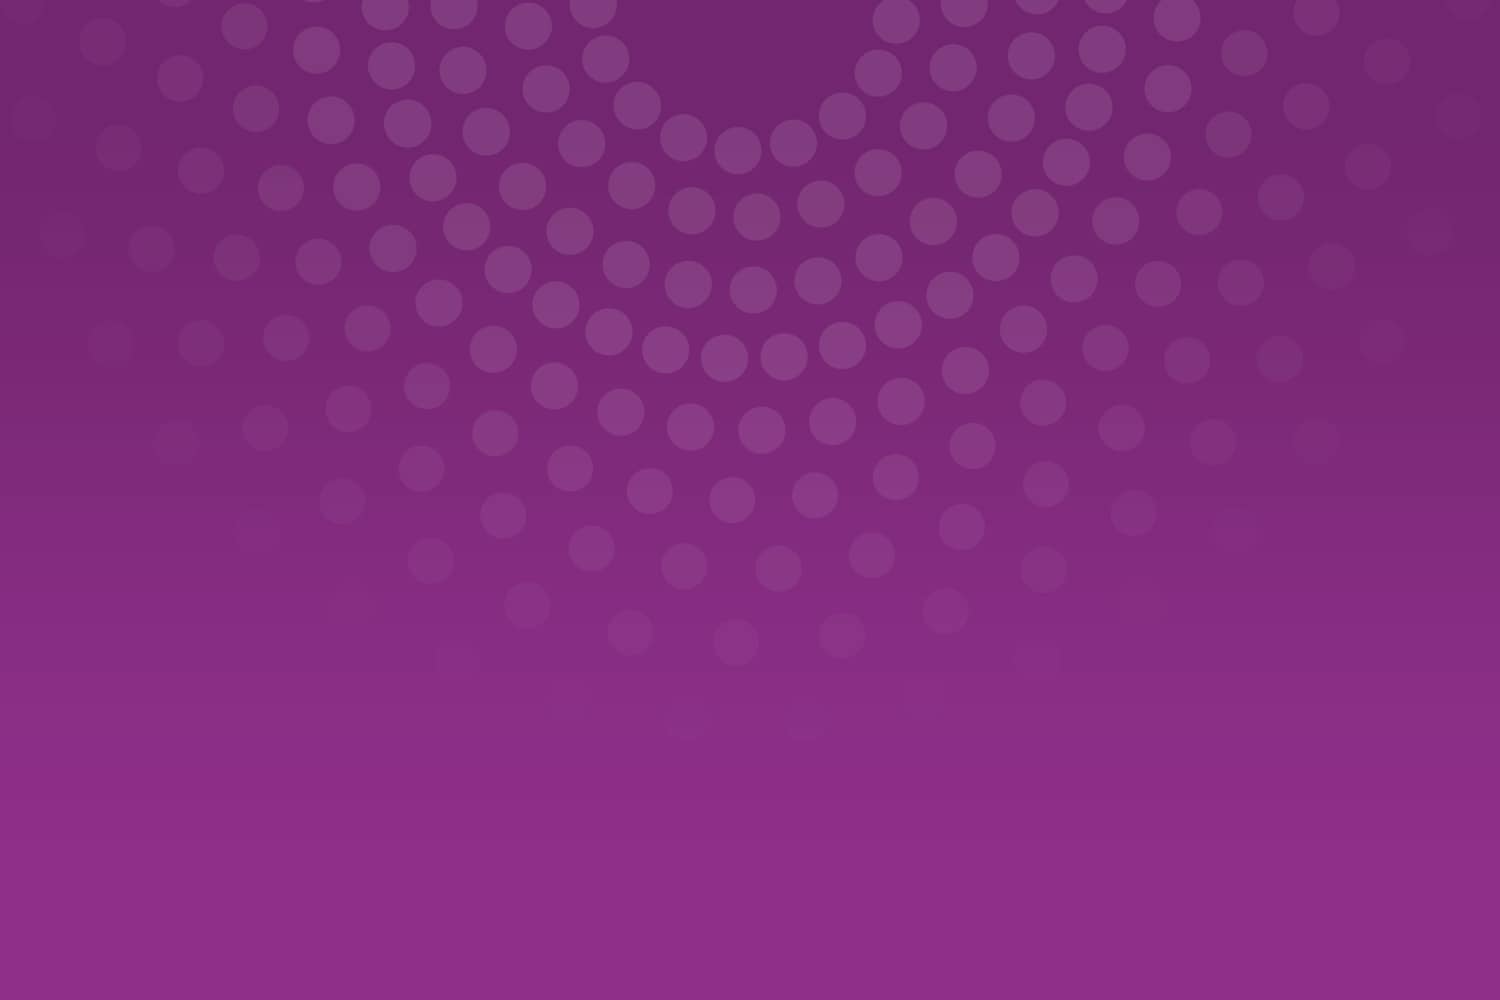 Abstract radiance art on plum background